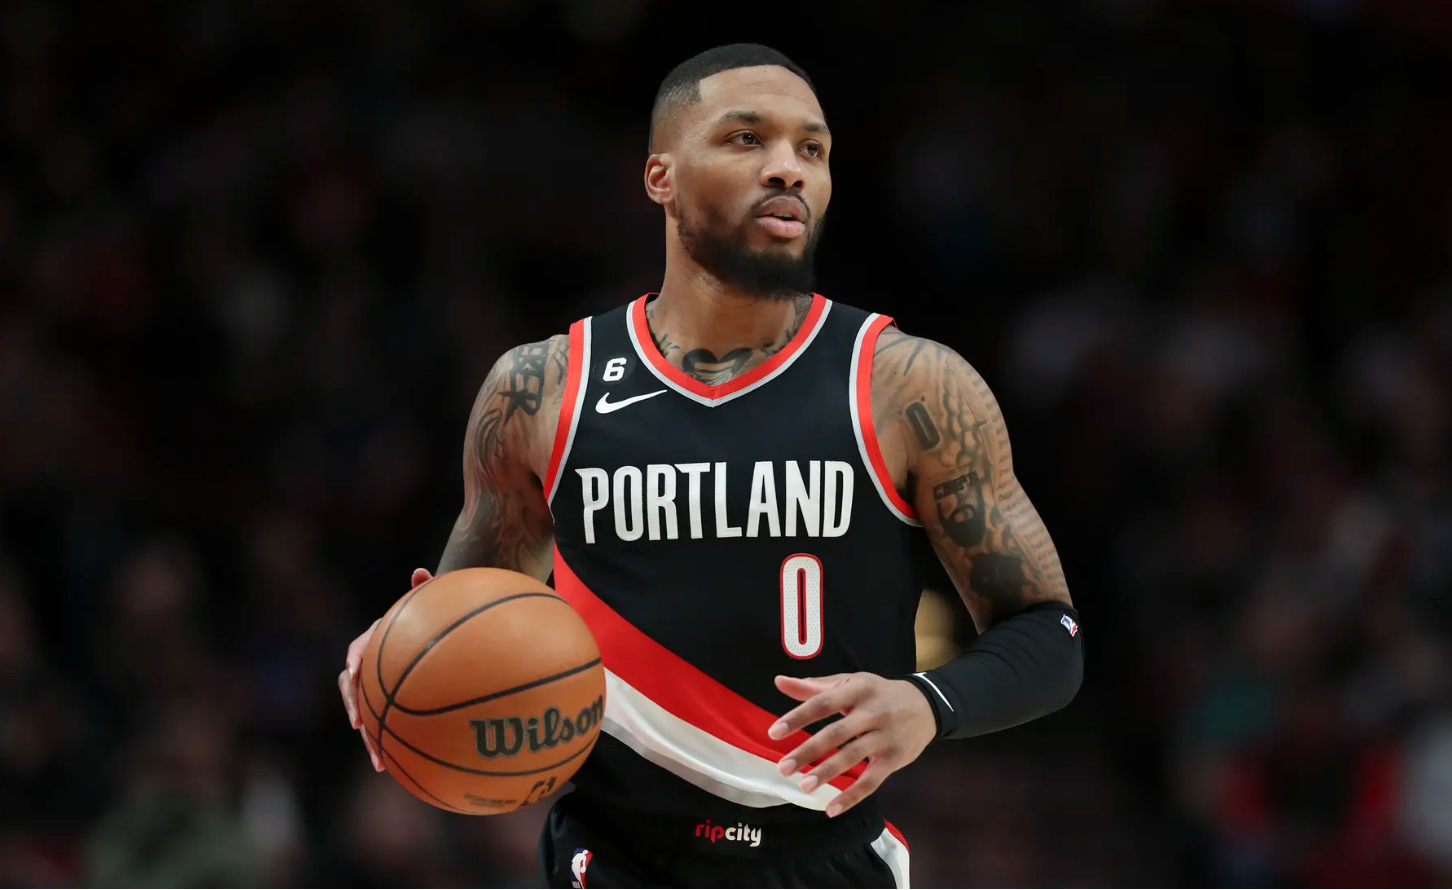 Who could the 'mystery' East team be in the Damian Lillard sweepstakes?